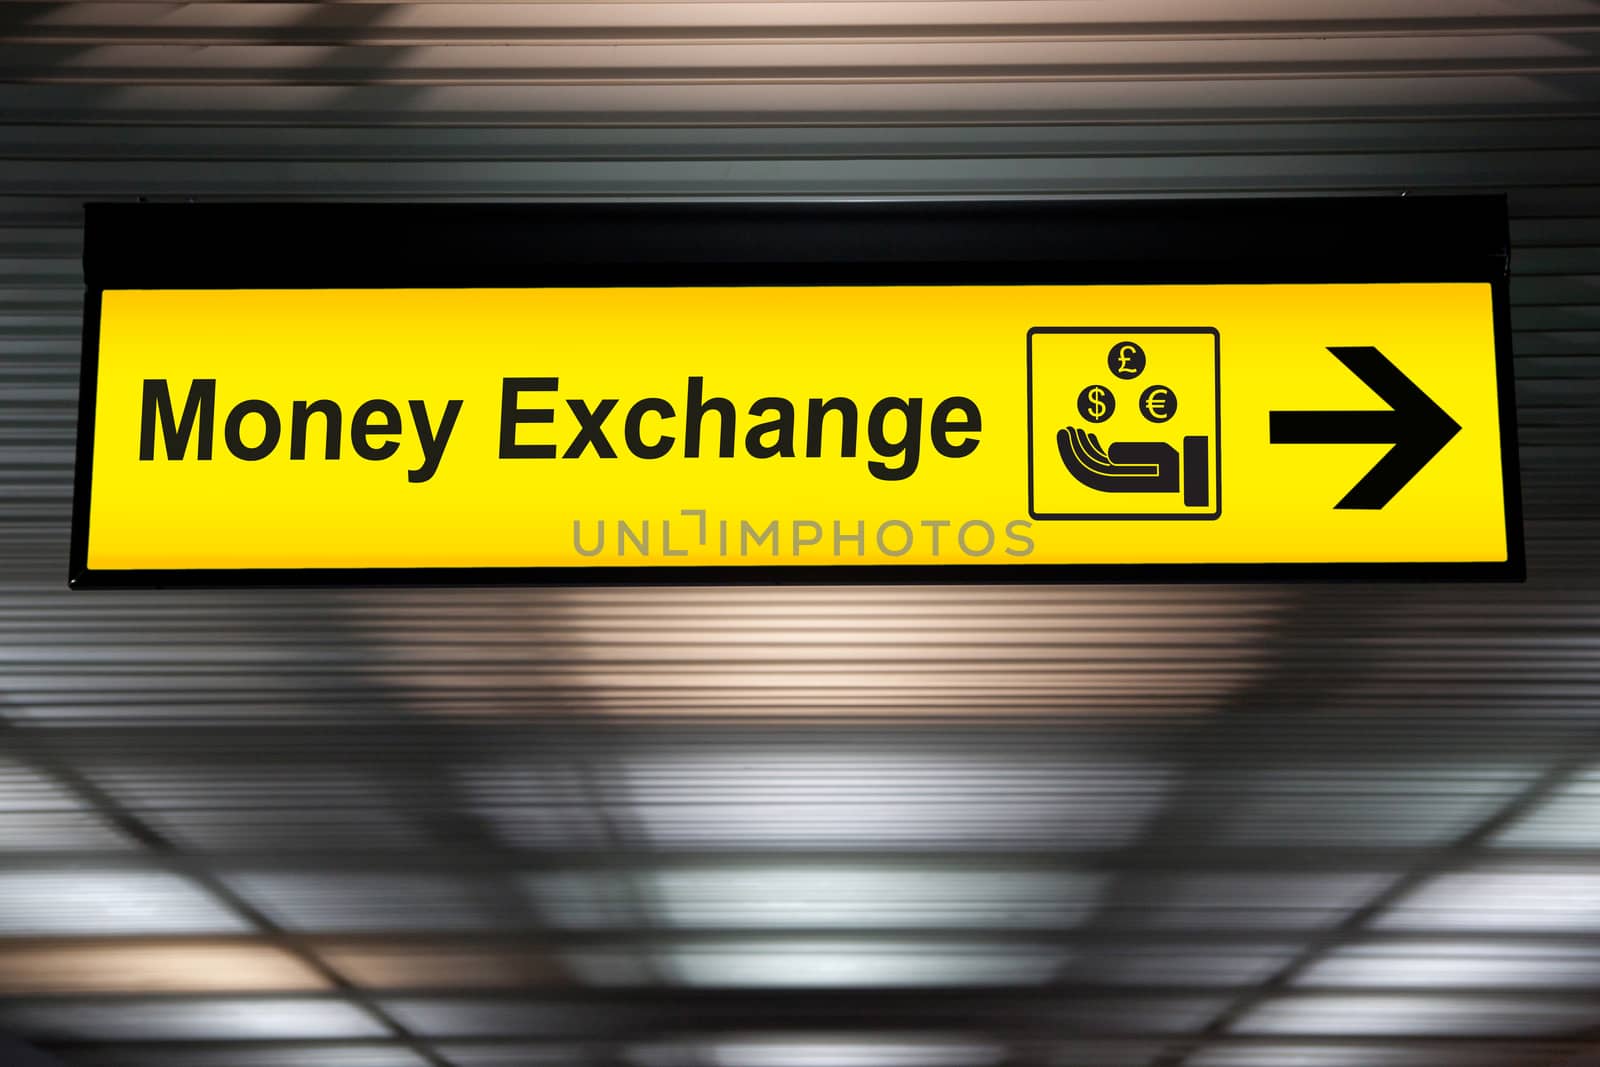 Money exchange sign at the airport by asiandelight